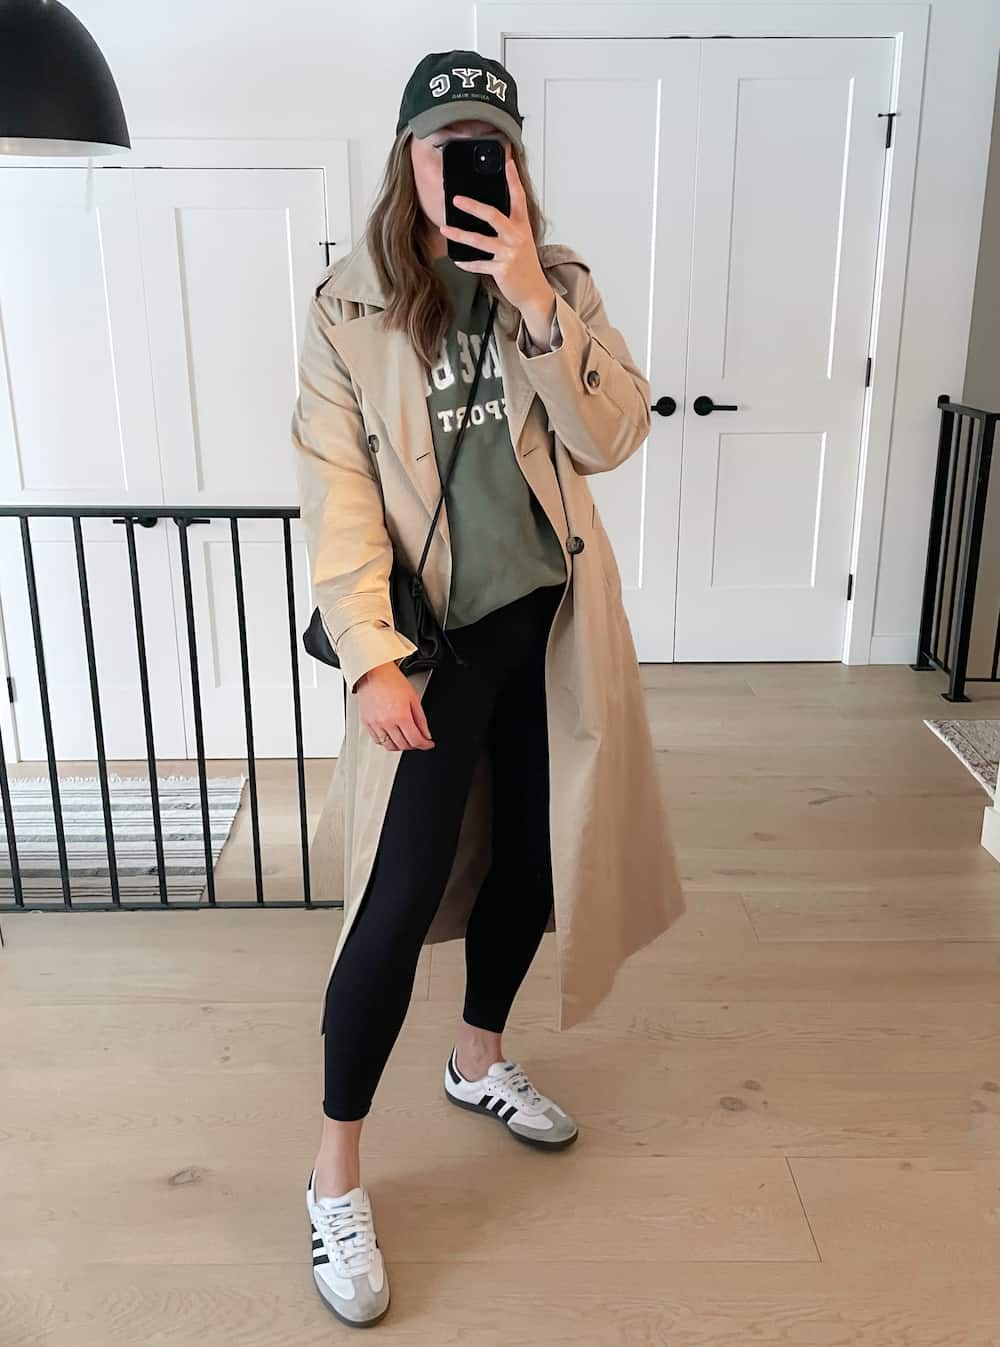 Christal wearing black leggings, an olive sweatshirt and a tan trench coat with sneakers and a baseball cap.